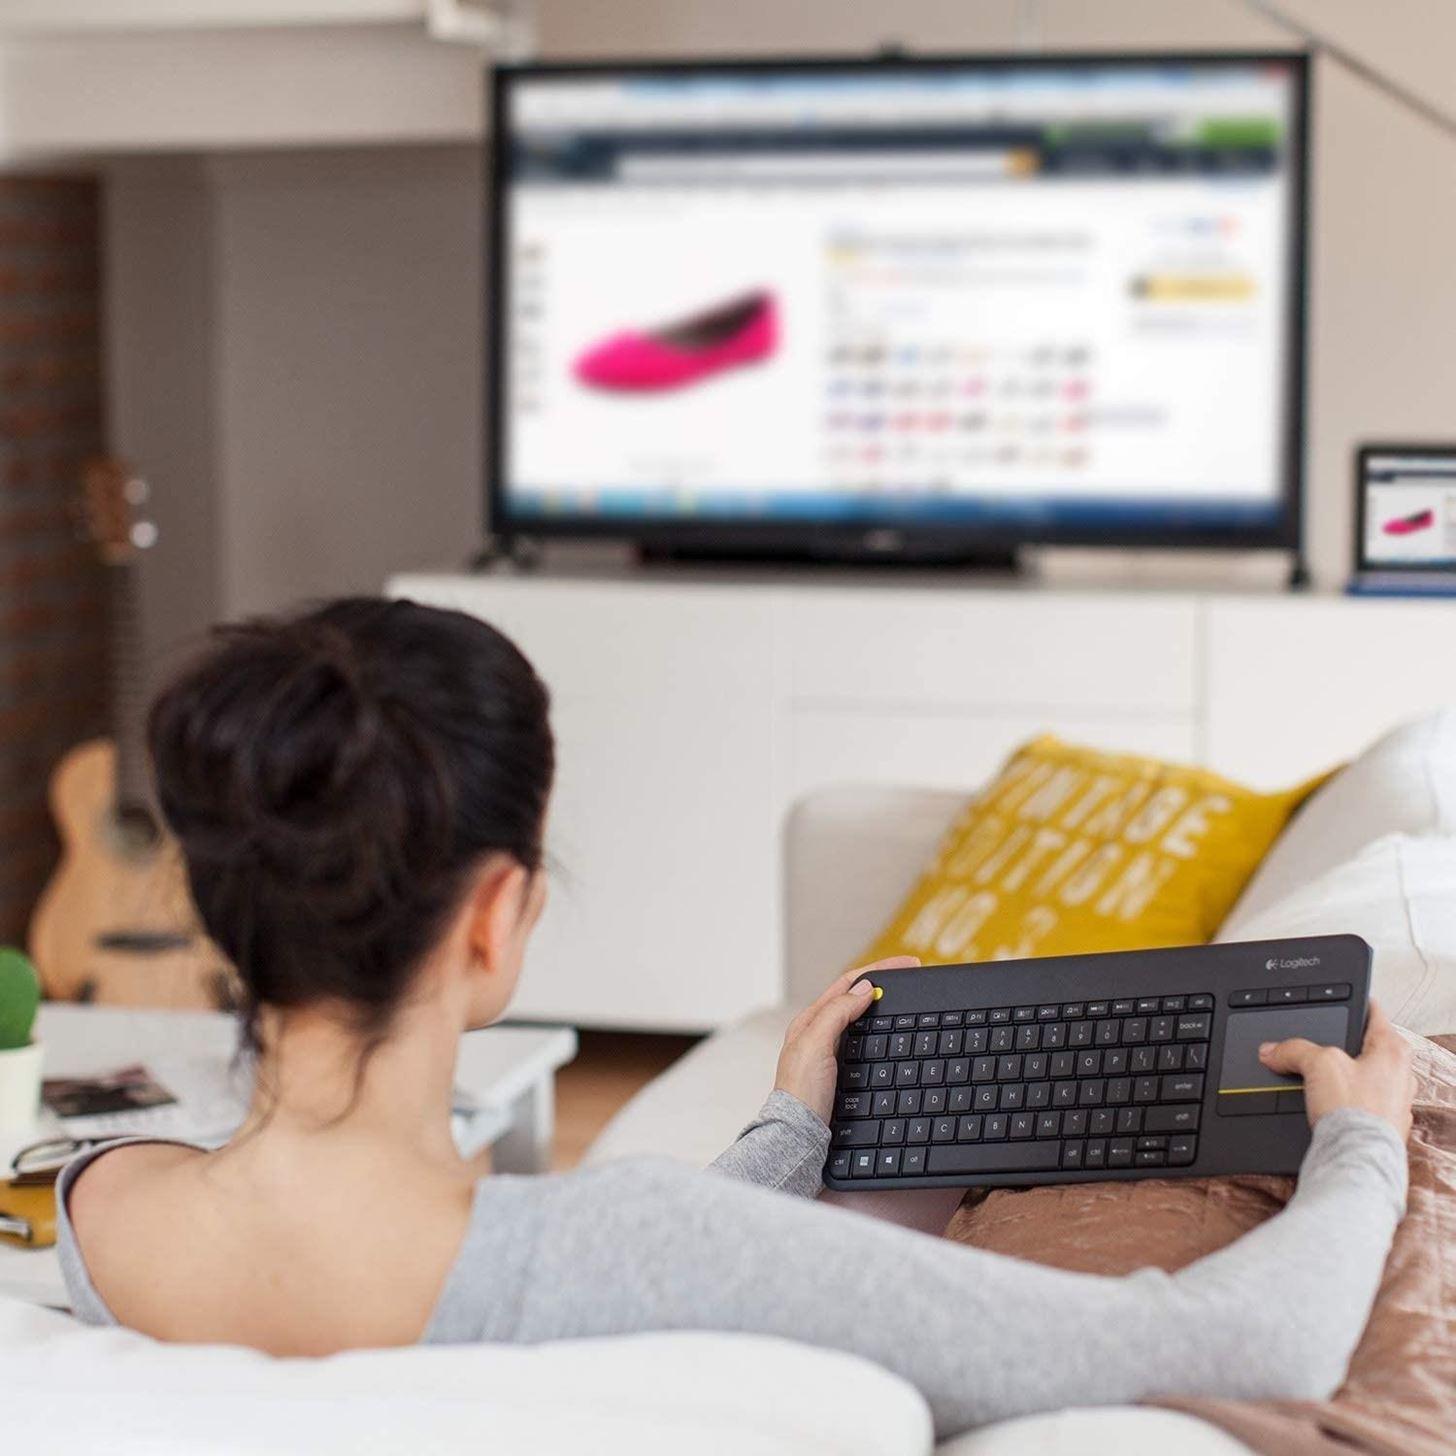 How to Use Your Smartphone as a Keyboard for Your Smart TV